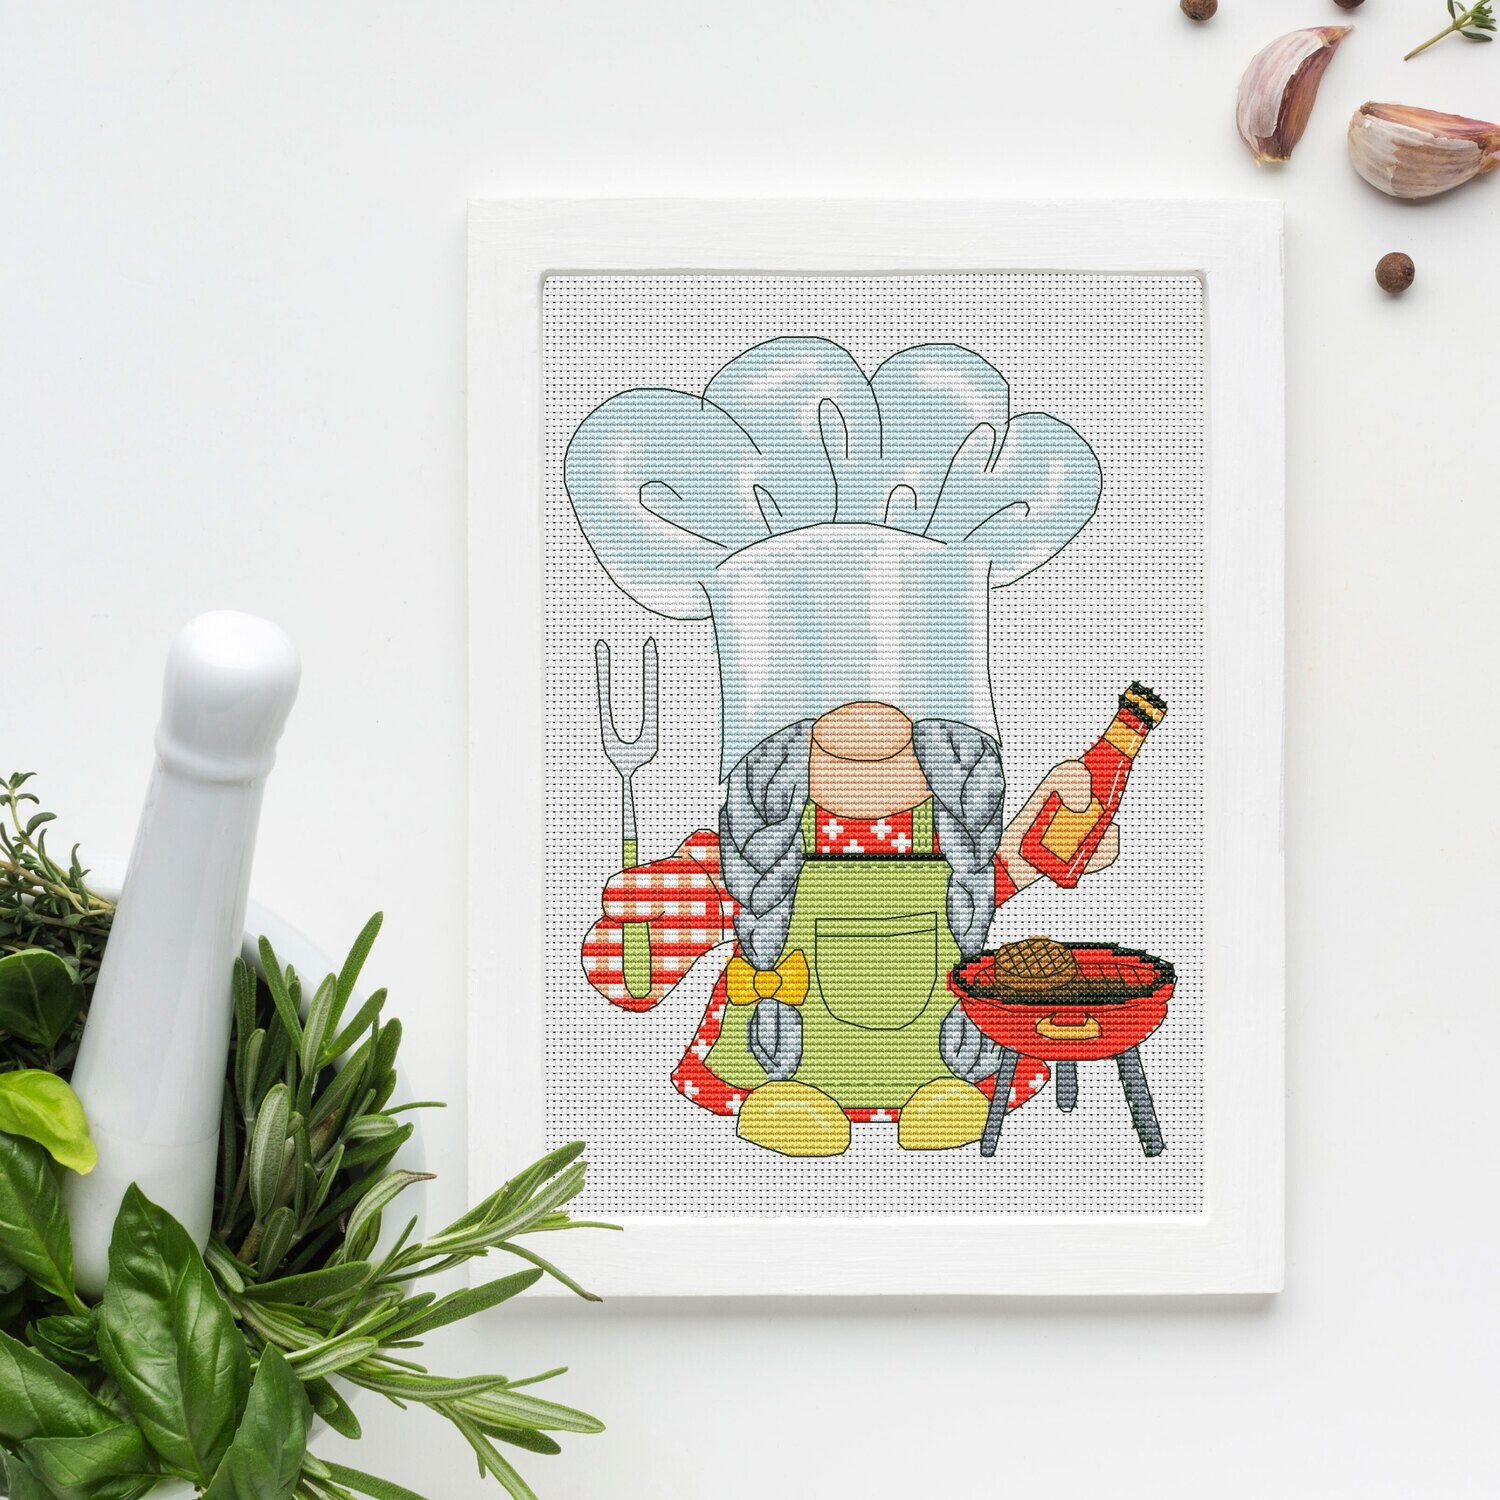 Girl on the barbecue, Cross stitch pattern, Girl cross stitch, Weekend cross stitch, Gnome cross stitch